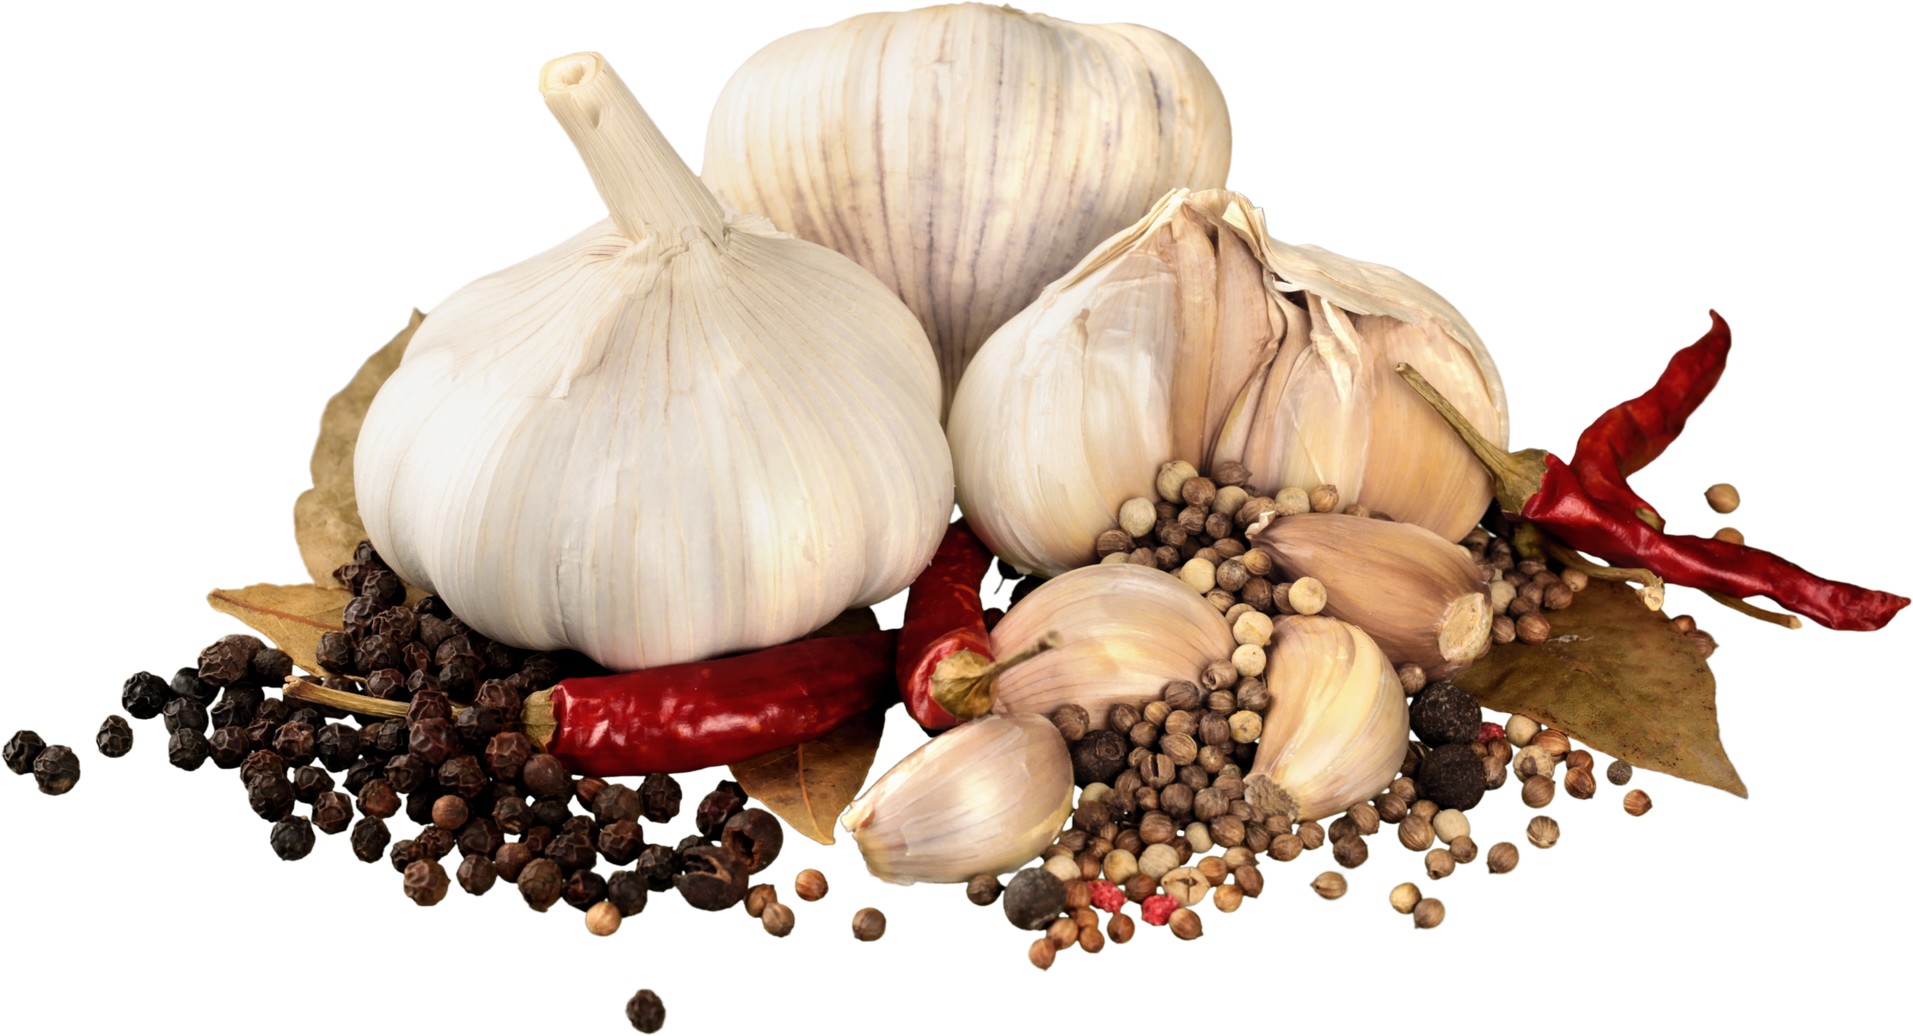 Garlic with Other Spices - Isolated